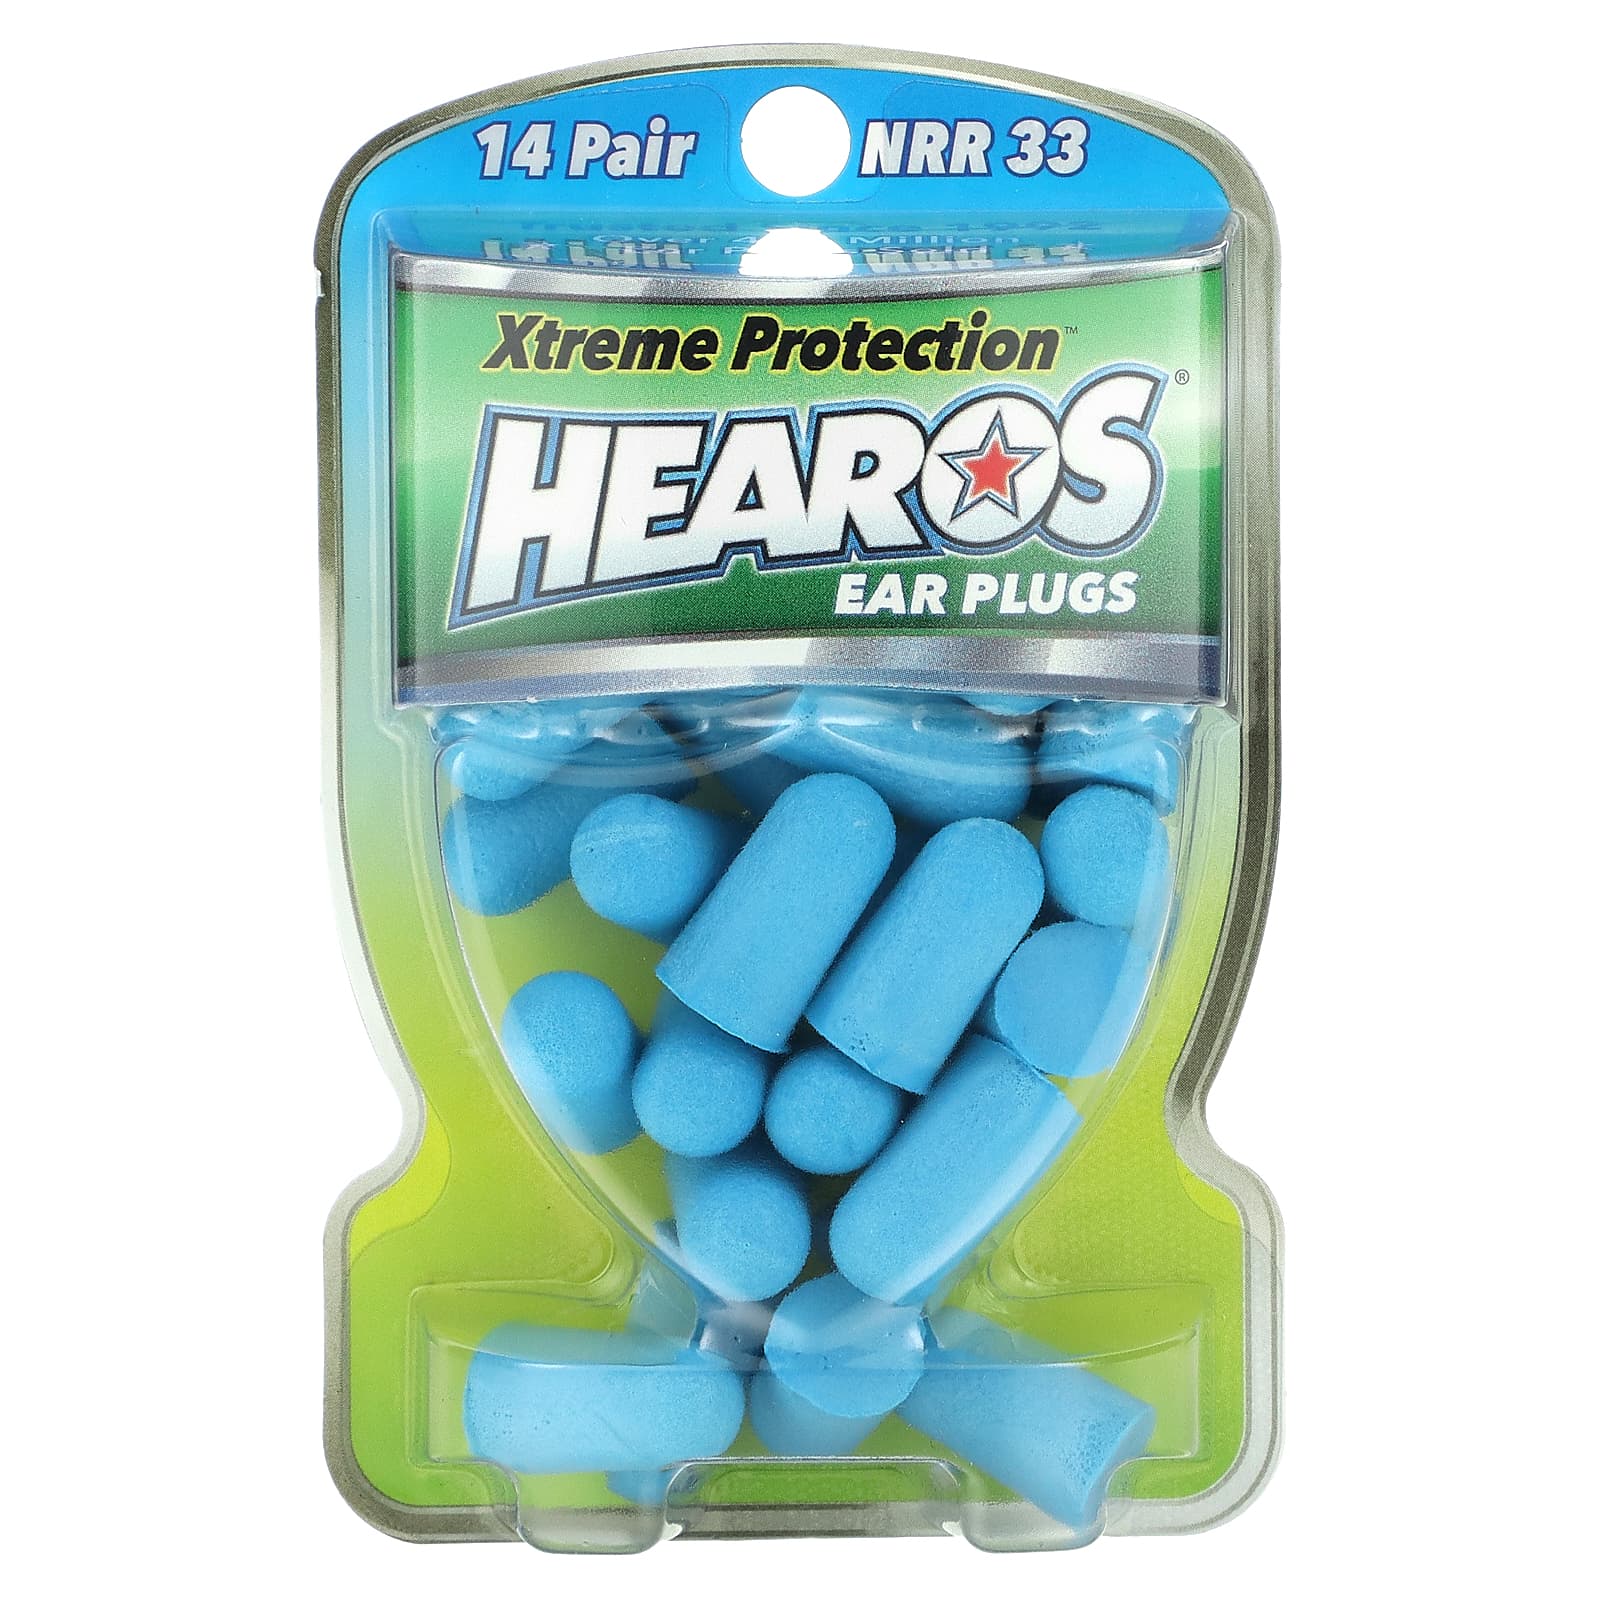 : Beauty Value Pack of 2 14 Pairs each Hearos Ear Plugs Xtreme Protection Series